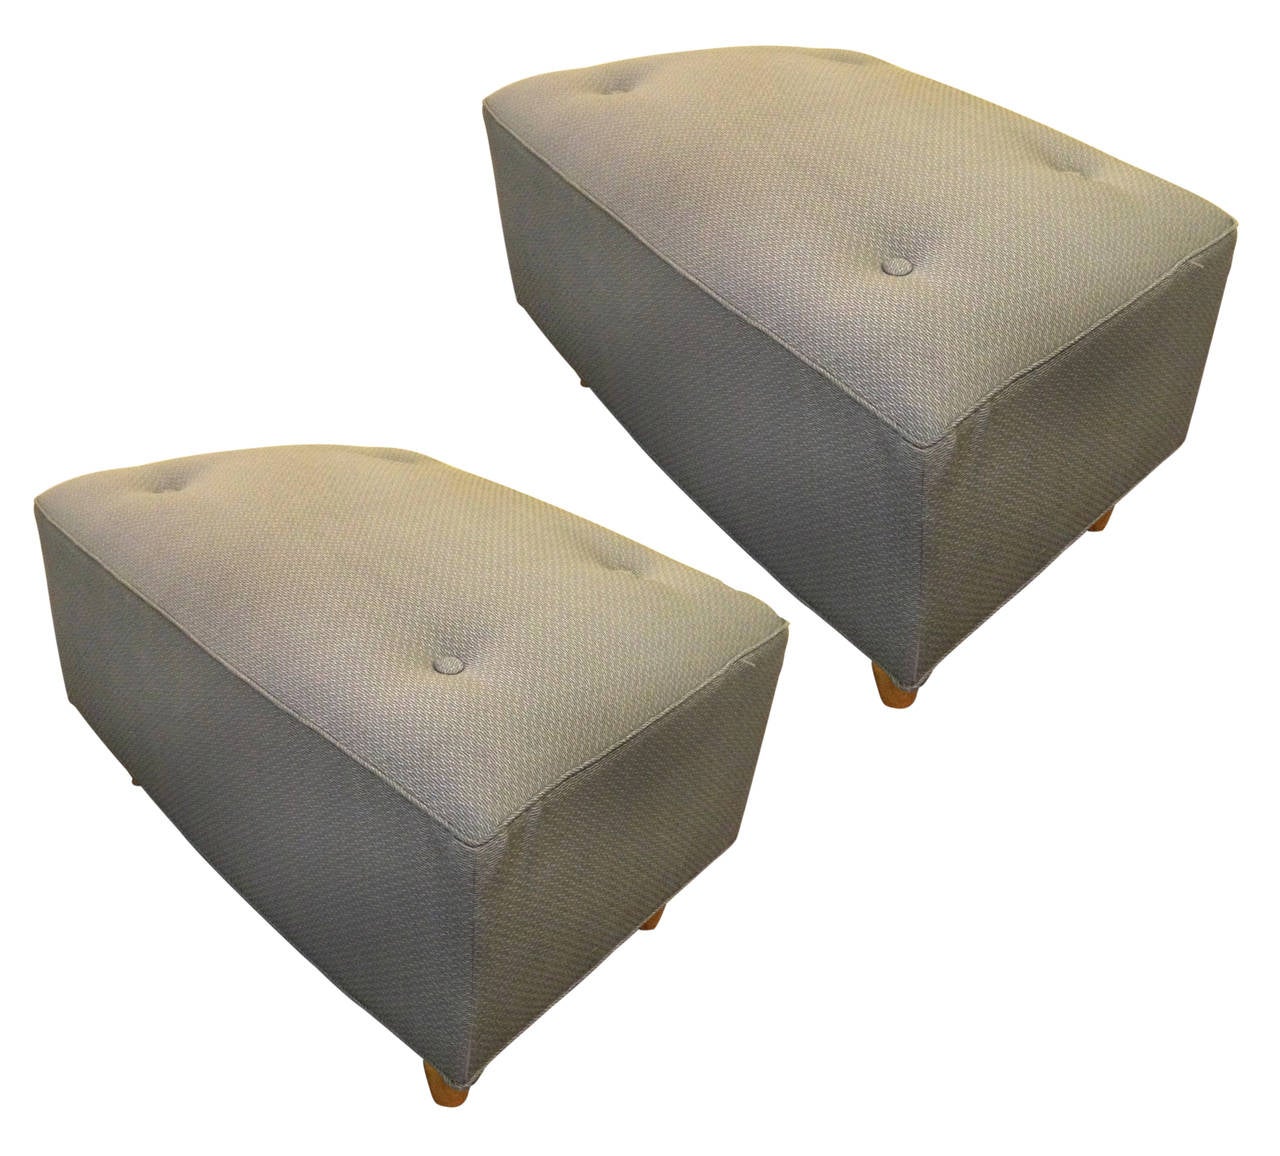 American Pair of Trapezoidal Ottomans by Heywood Wakefield